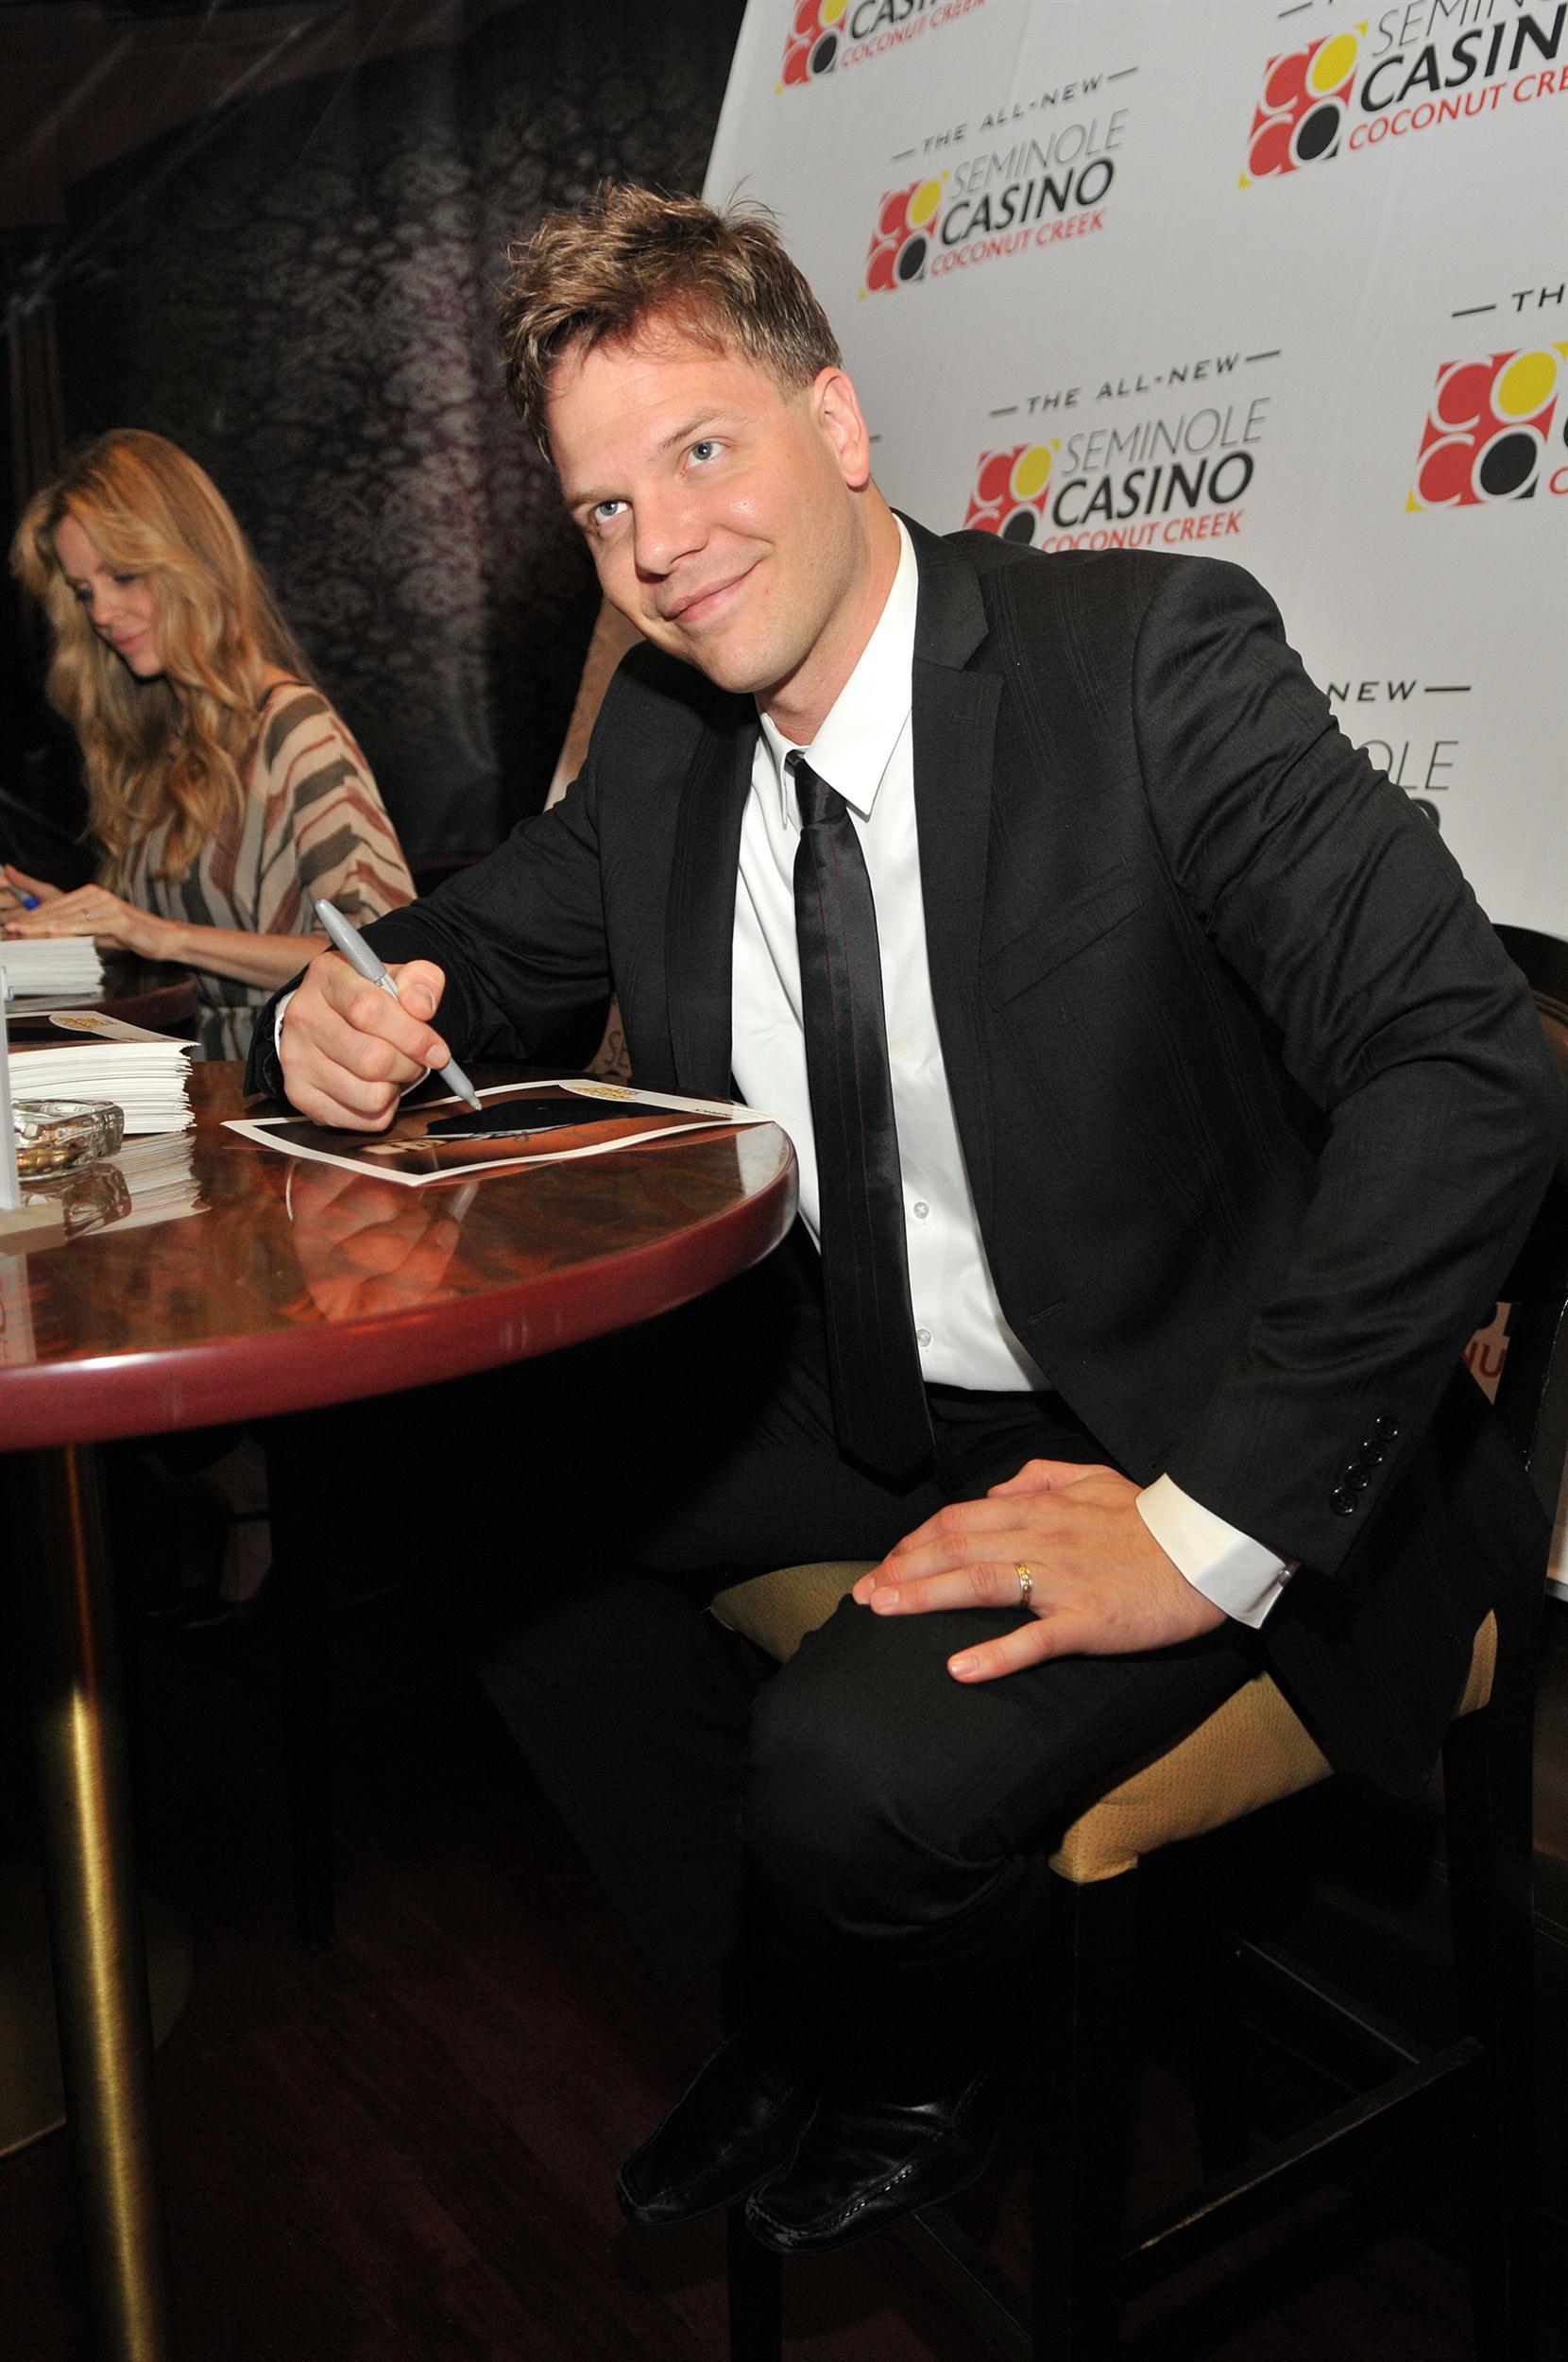 Jim Parrack and Kristen Bauer of the HBO Series 'True Blood' appear at the Seminole Coconut Creek | Picture 103698